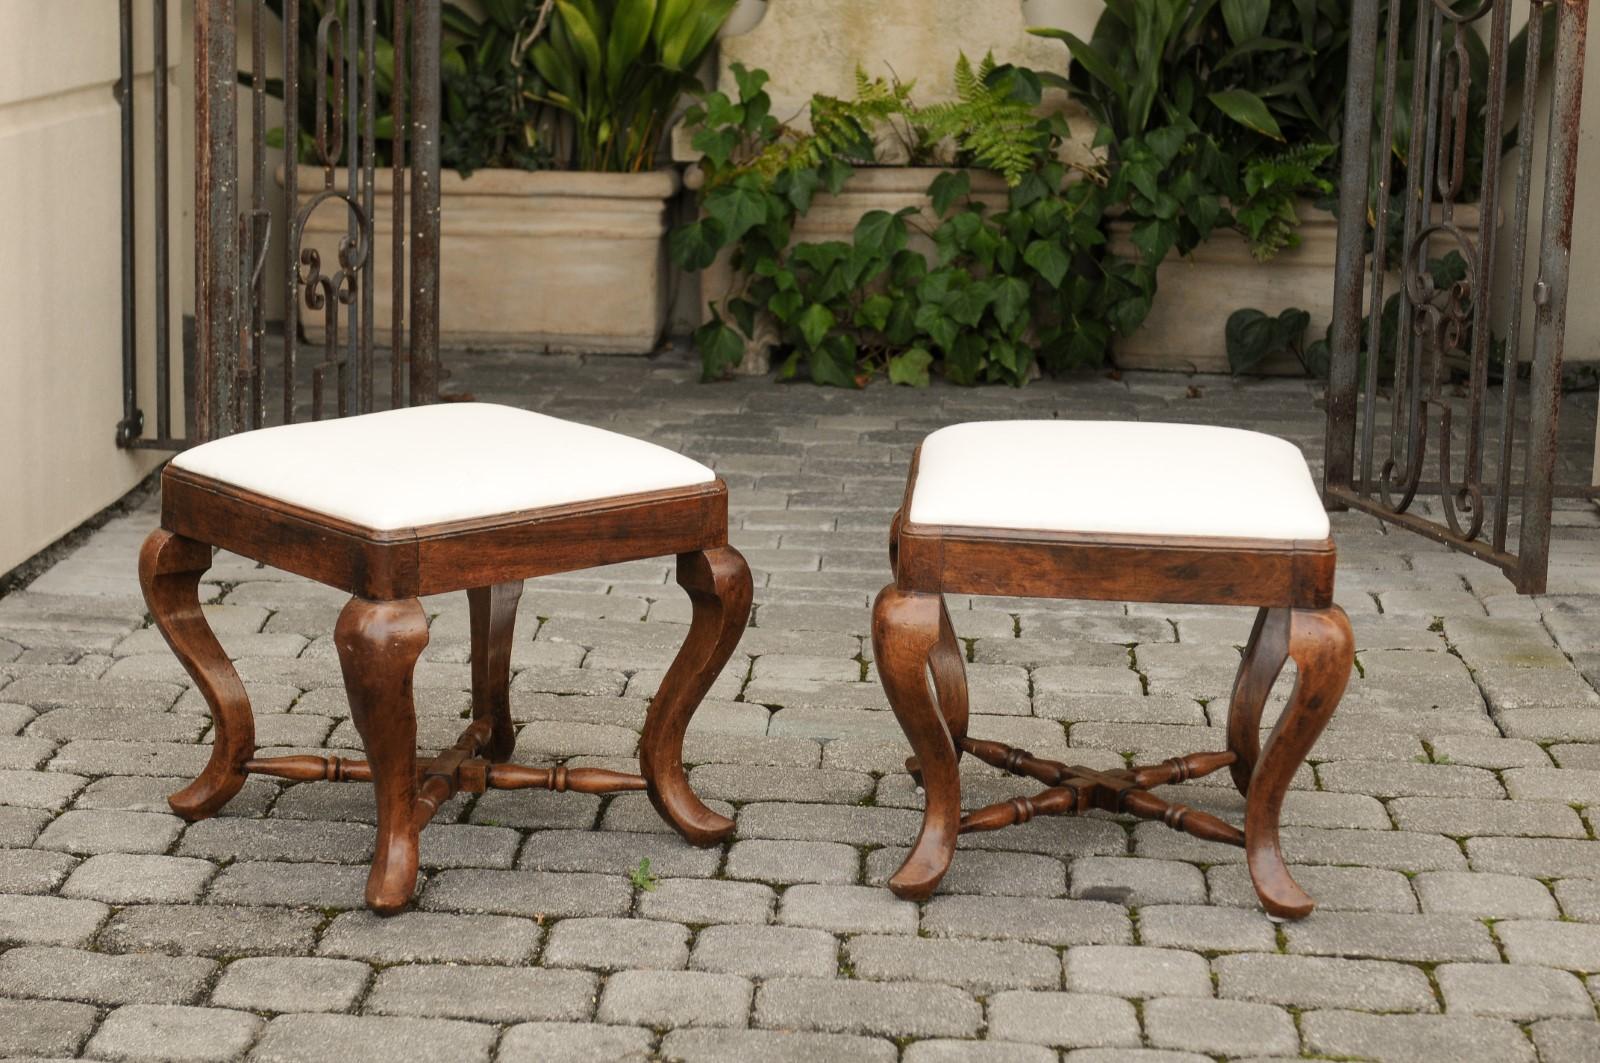 A pair of Italian Rococo style walnut stools from the mid-19th century, with cabriole legs, Saint-Andrew cross stretcher and new upholstery. Each of this pair of Italian Rococo style stools features a square seat, recovered with a simple muslin